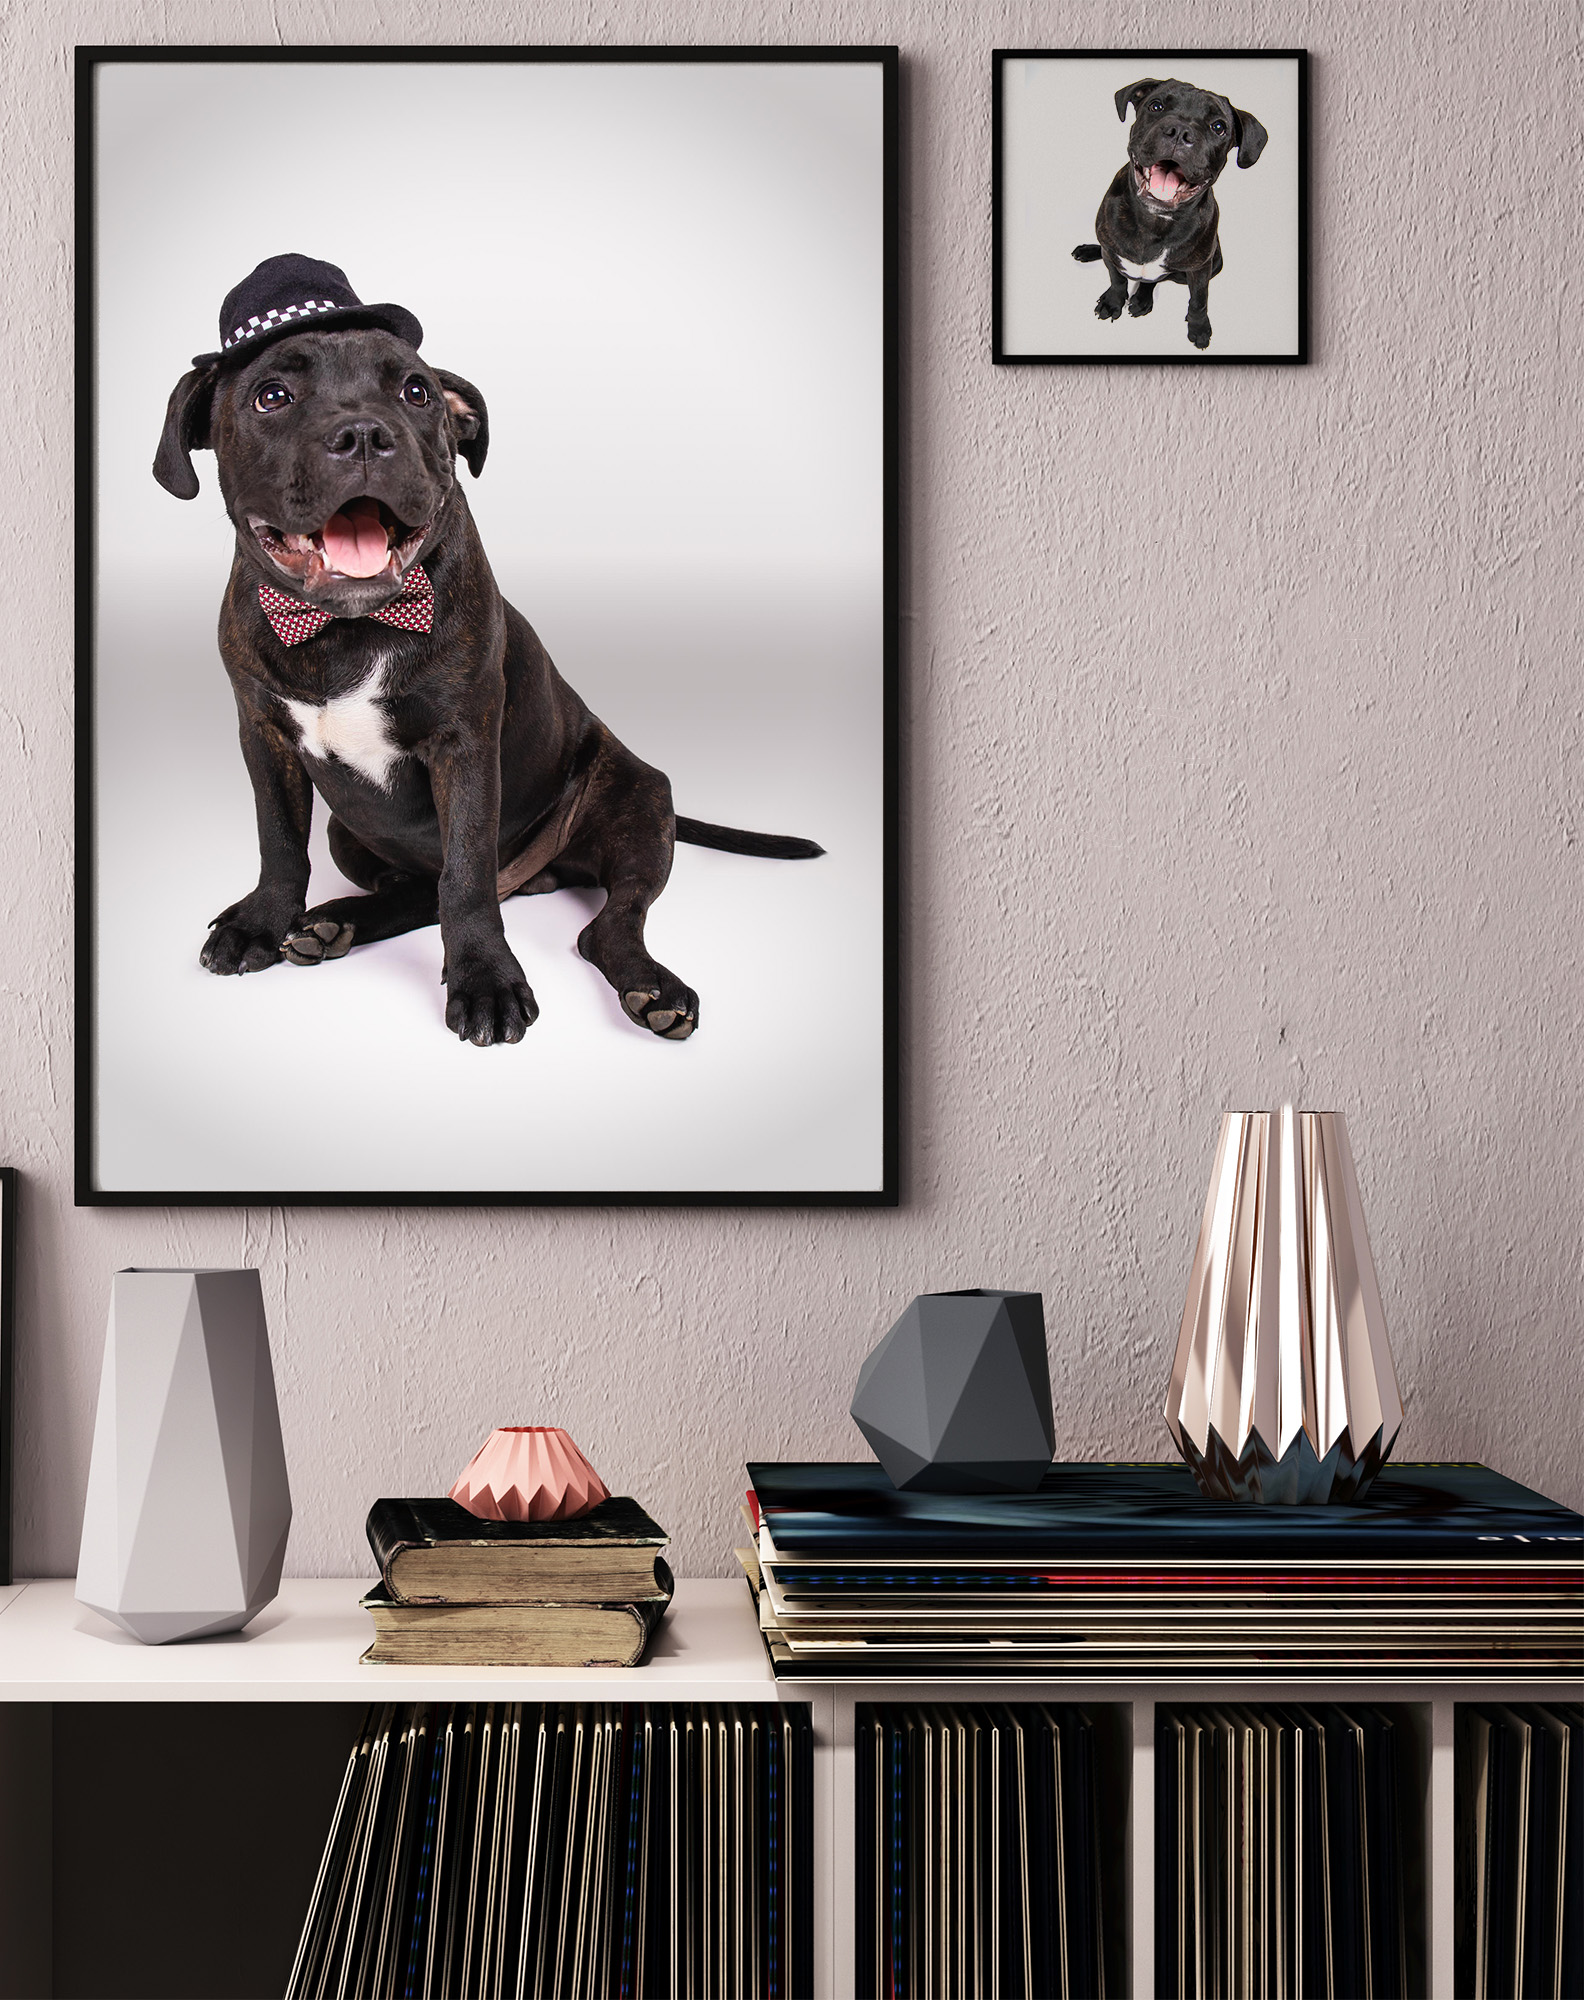 Puppy Lincoln in stylish room mockup with records.